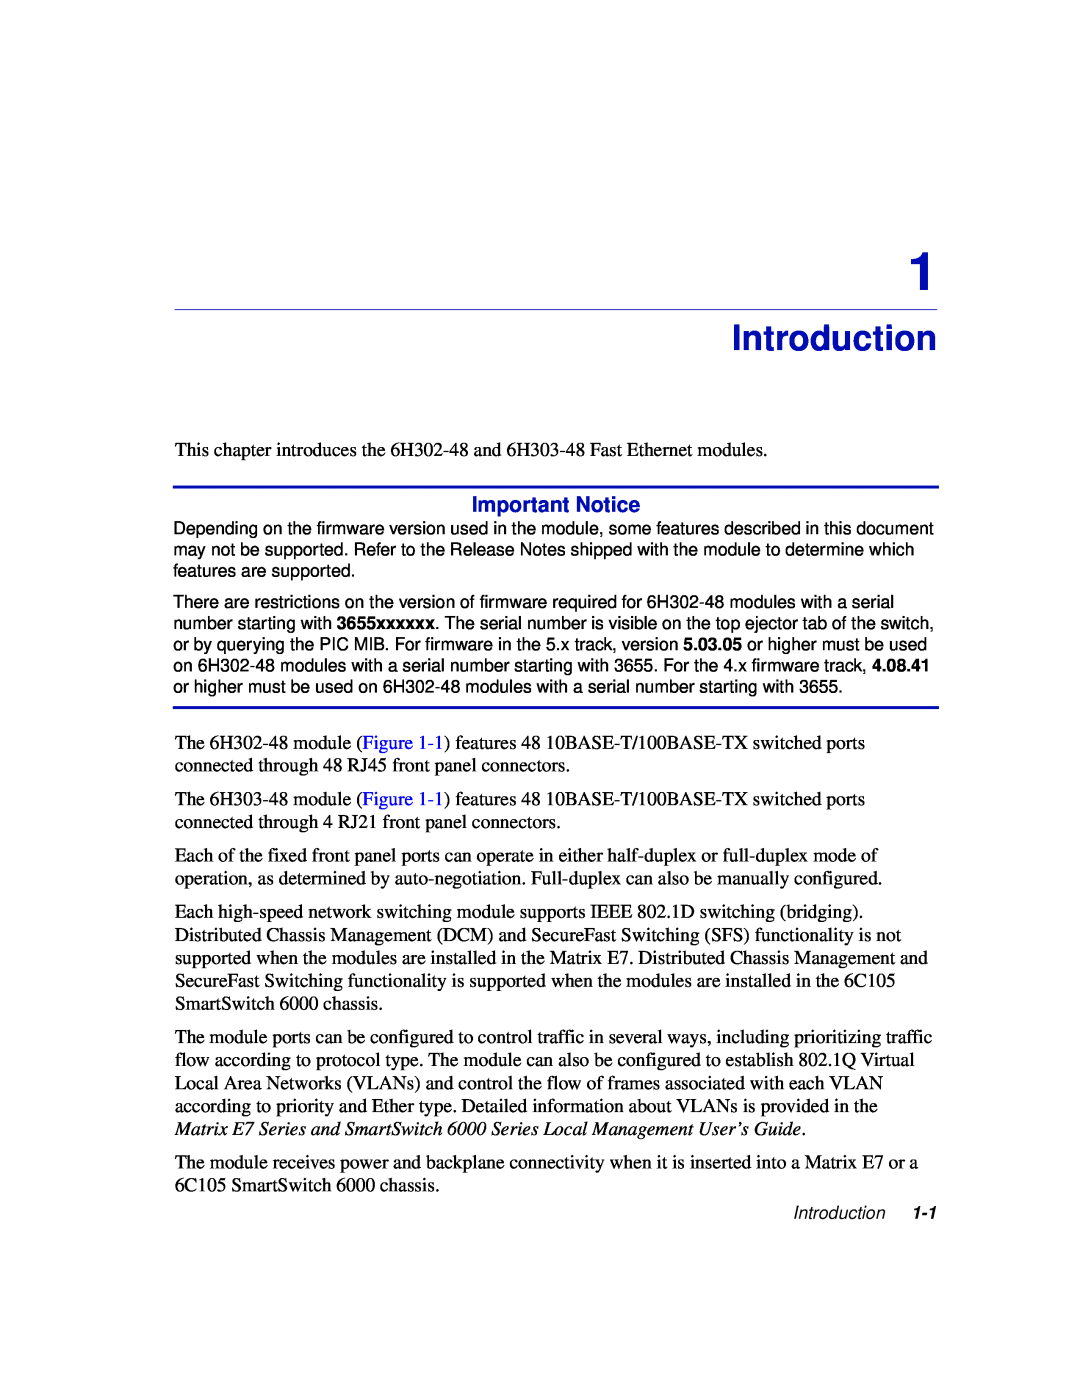 Enterasys Networks 6H302-48 manual Introduction, Important Notice 